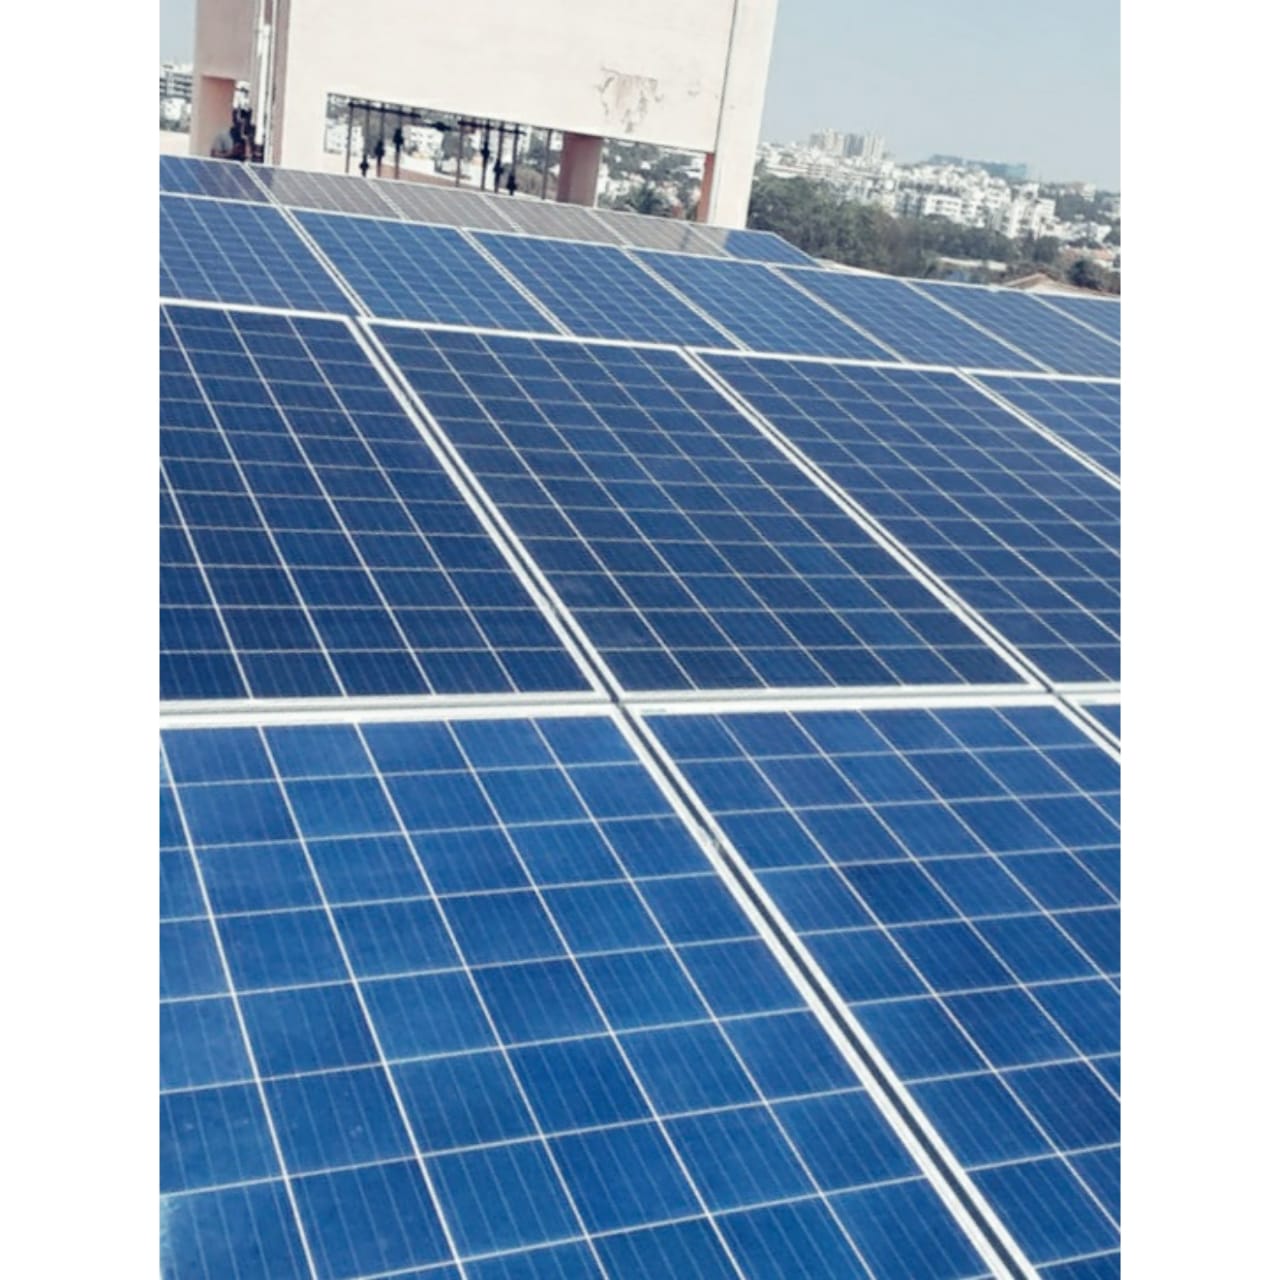 Solar panels installed on top of logistic company.